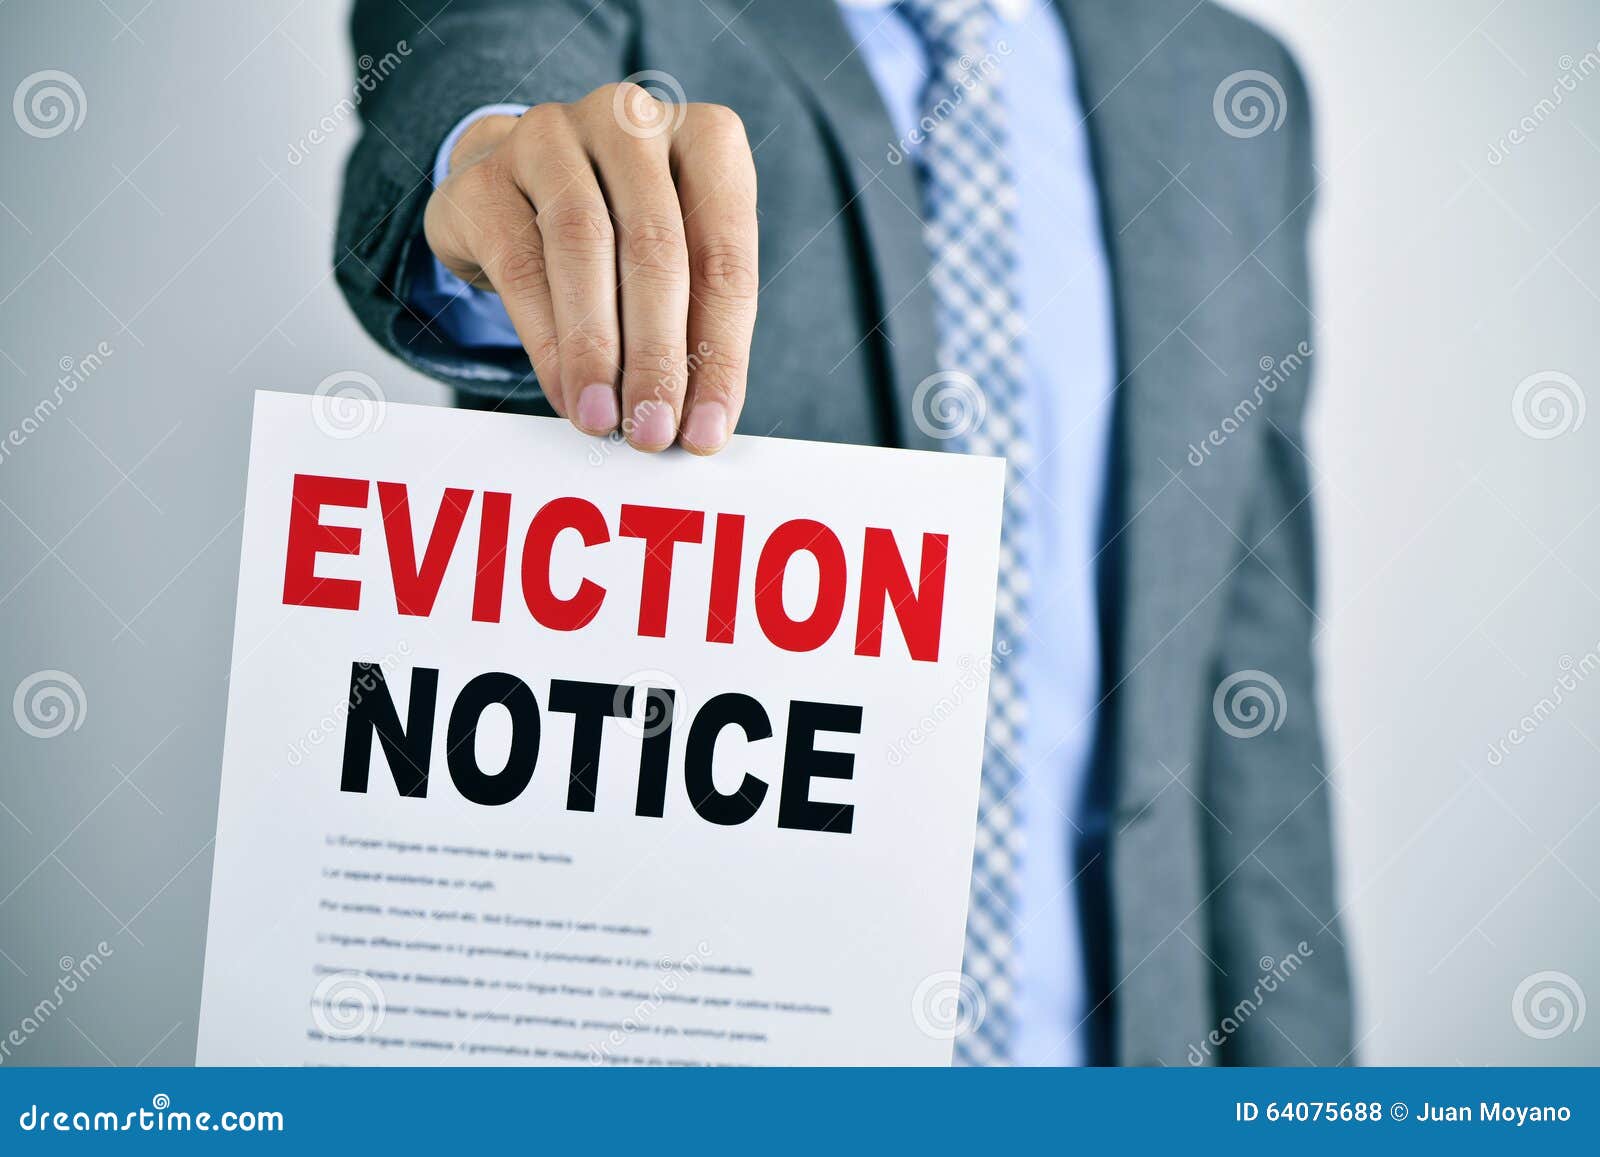 man with an eviction notice